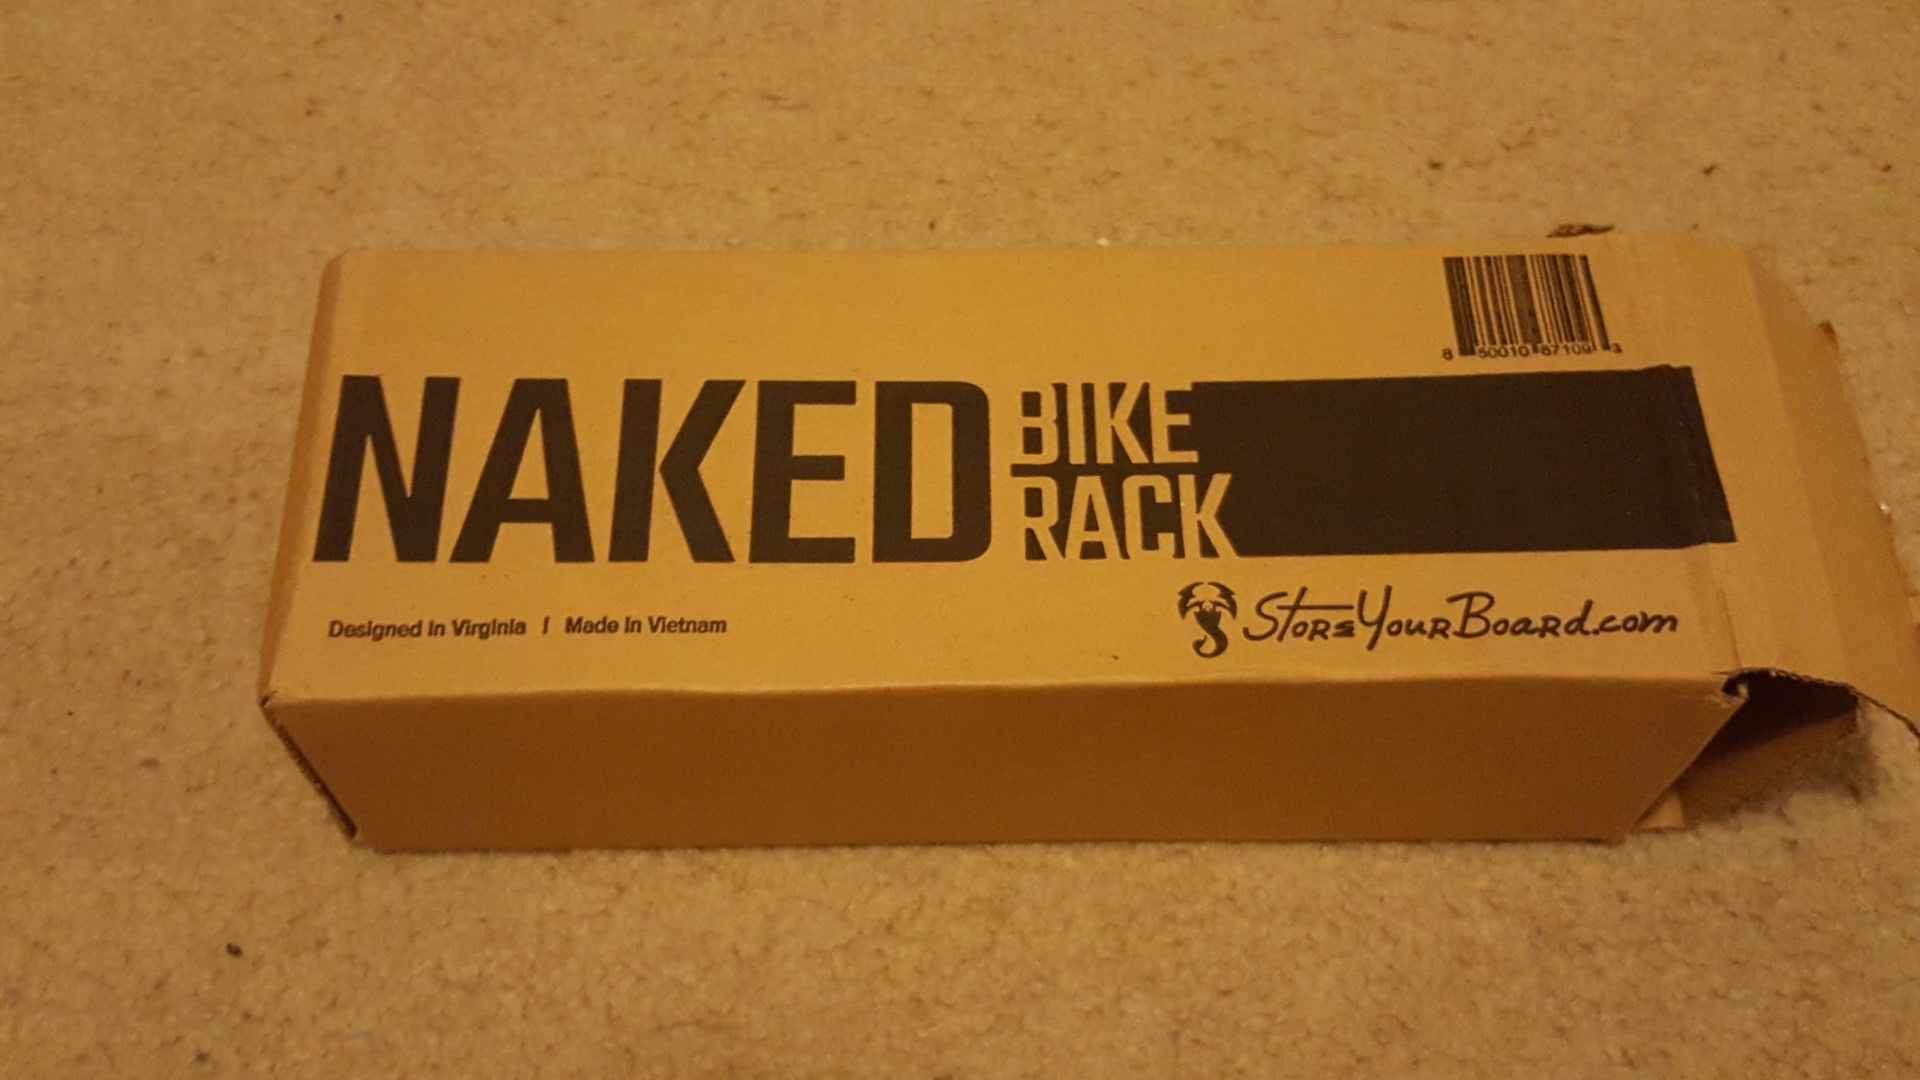 The naked rack for bike by store your board